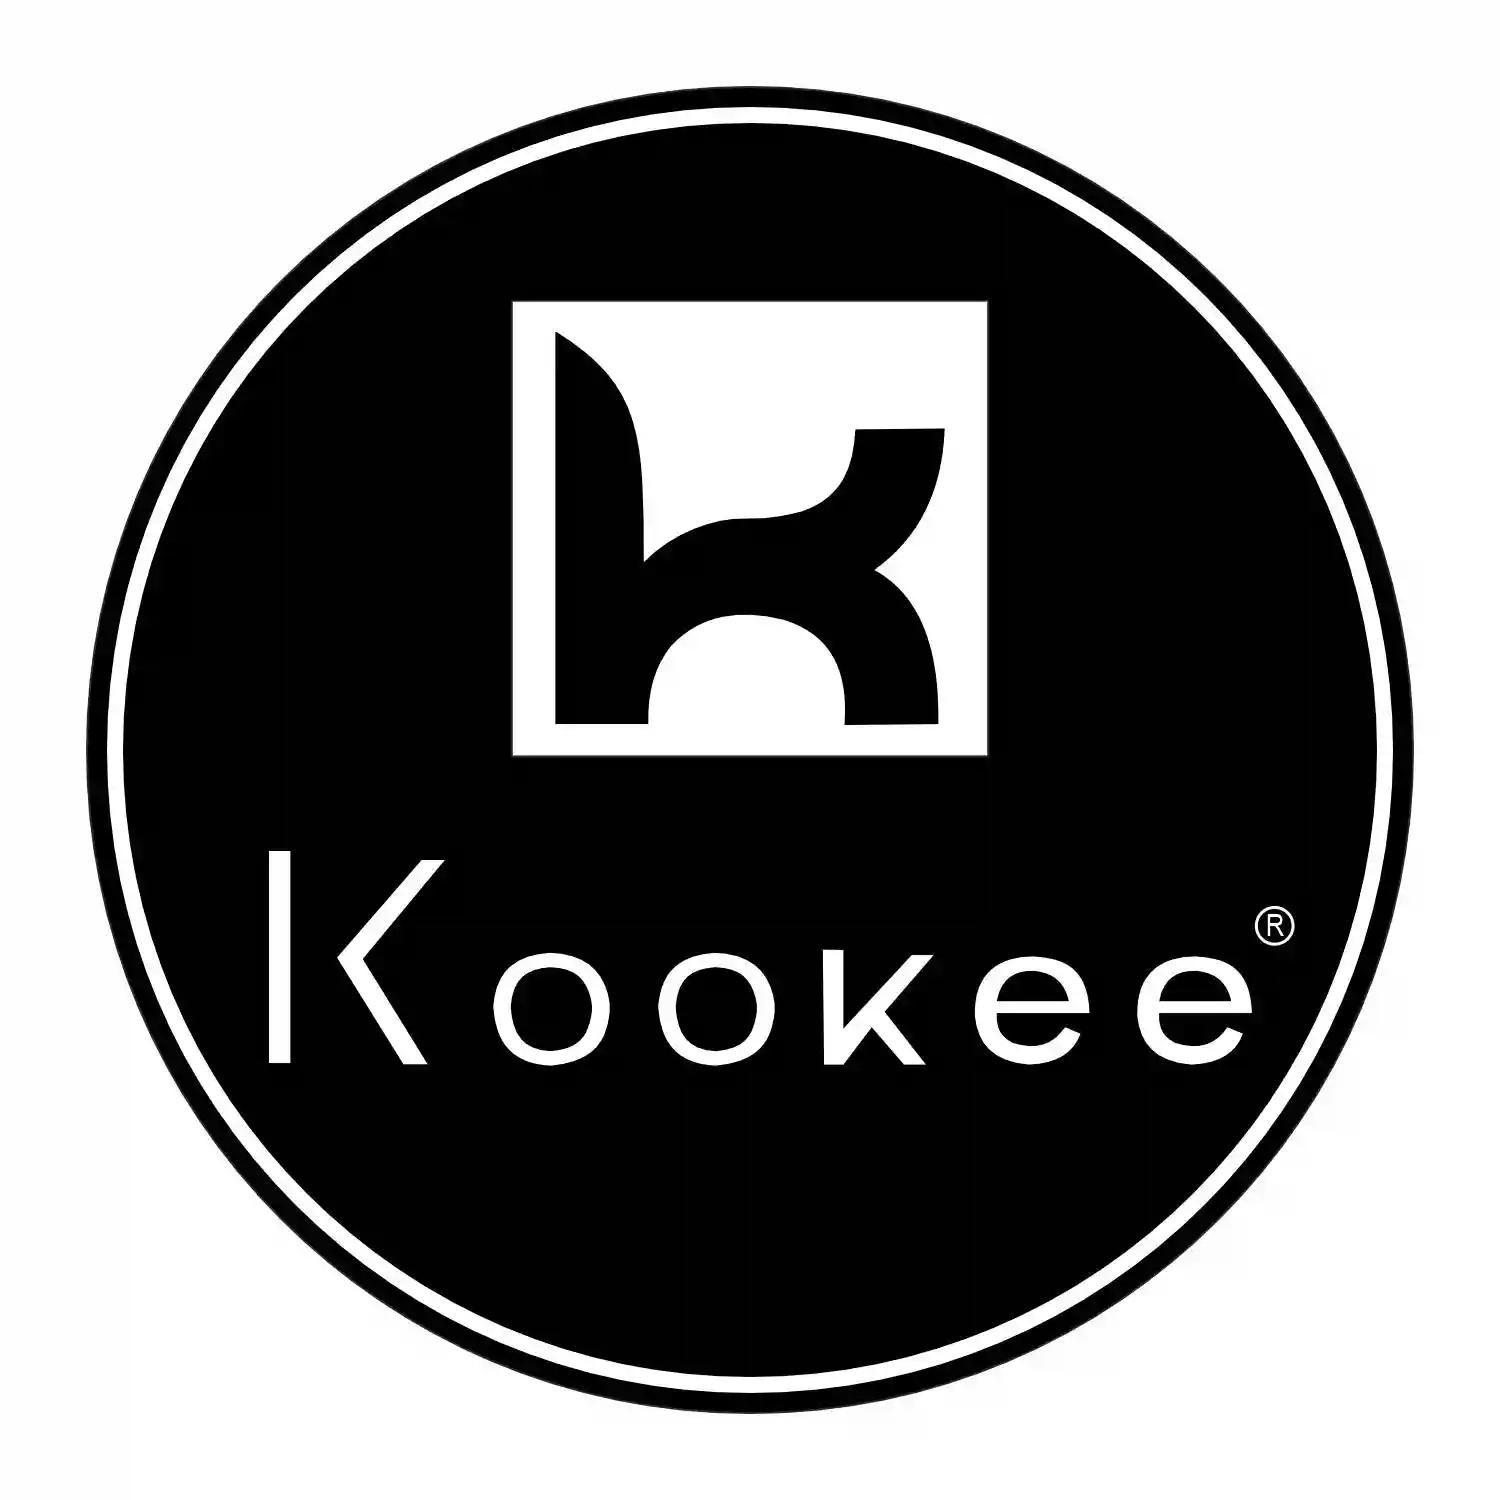 Kookee Glass Ashtray for Outdoor Indoor Transparent Modern Home Decor Tabletop Ashtray for Smokers, Printed, Round (Diameter: 10cm) (9830)